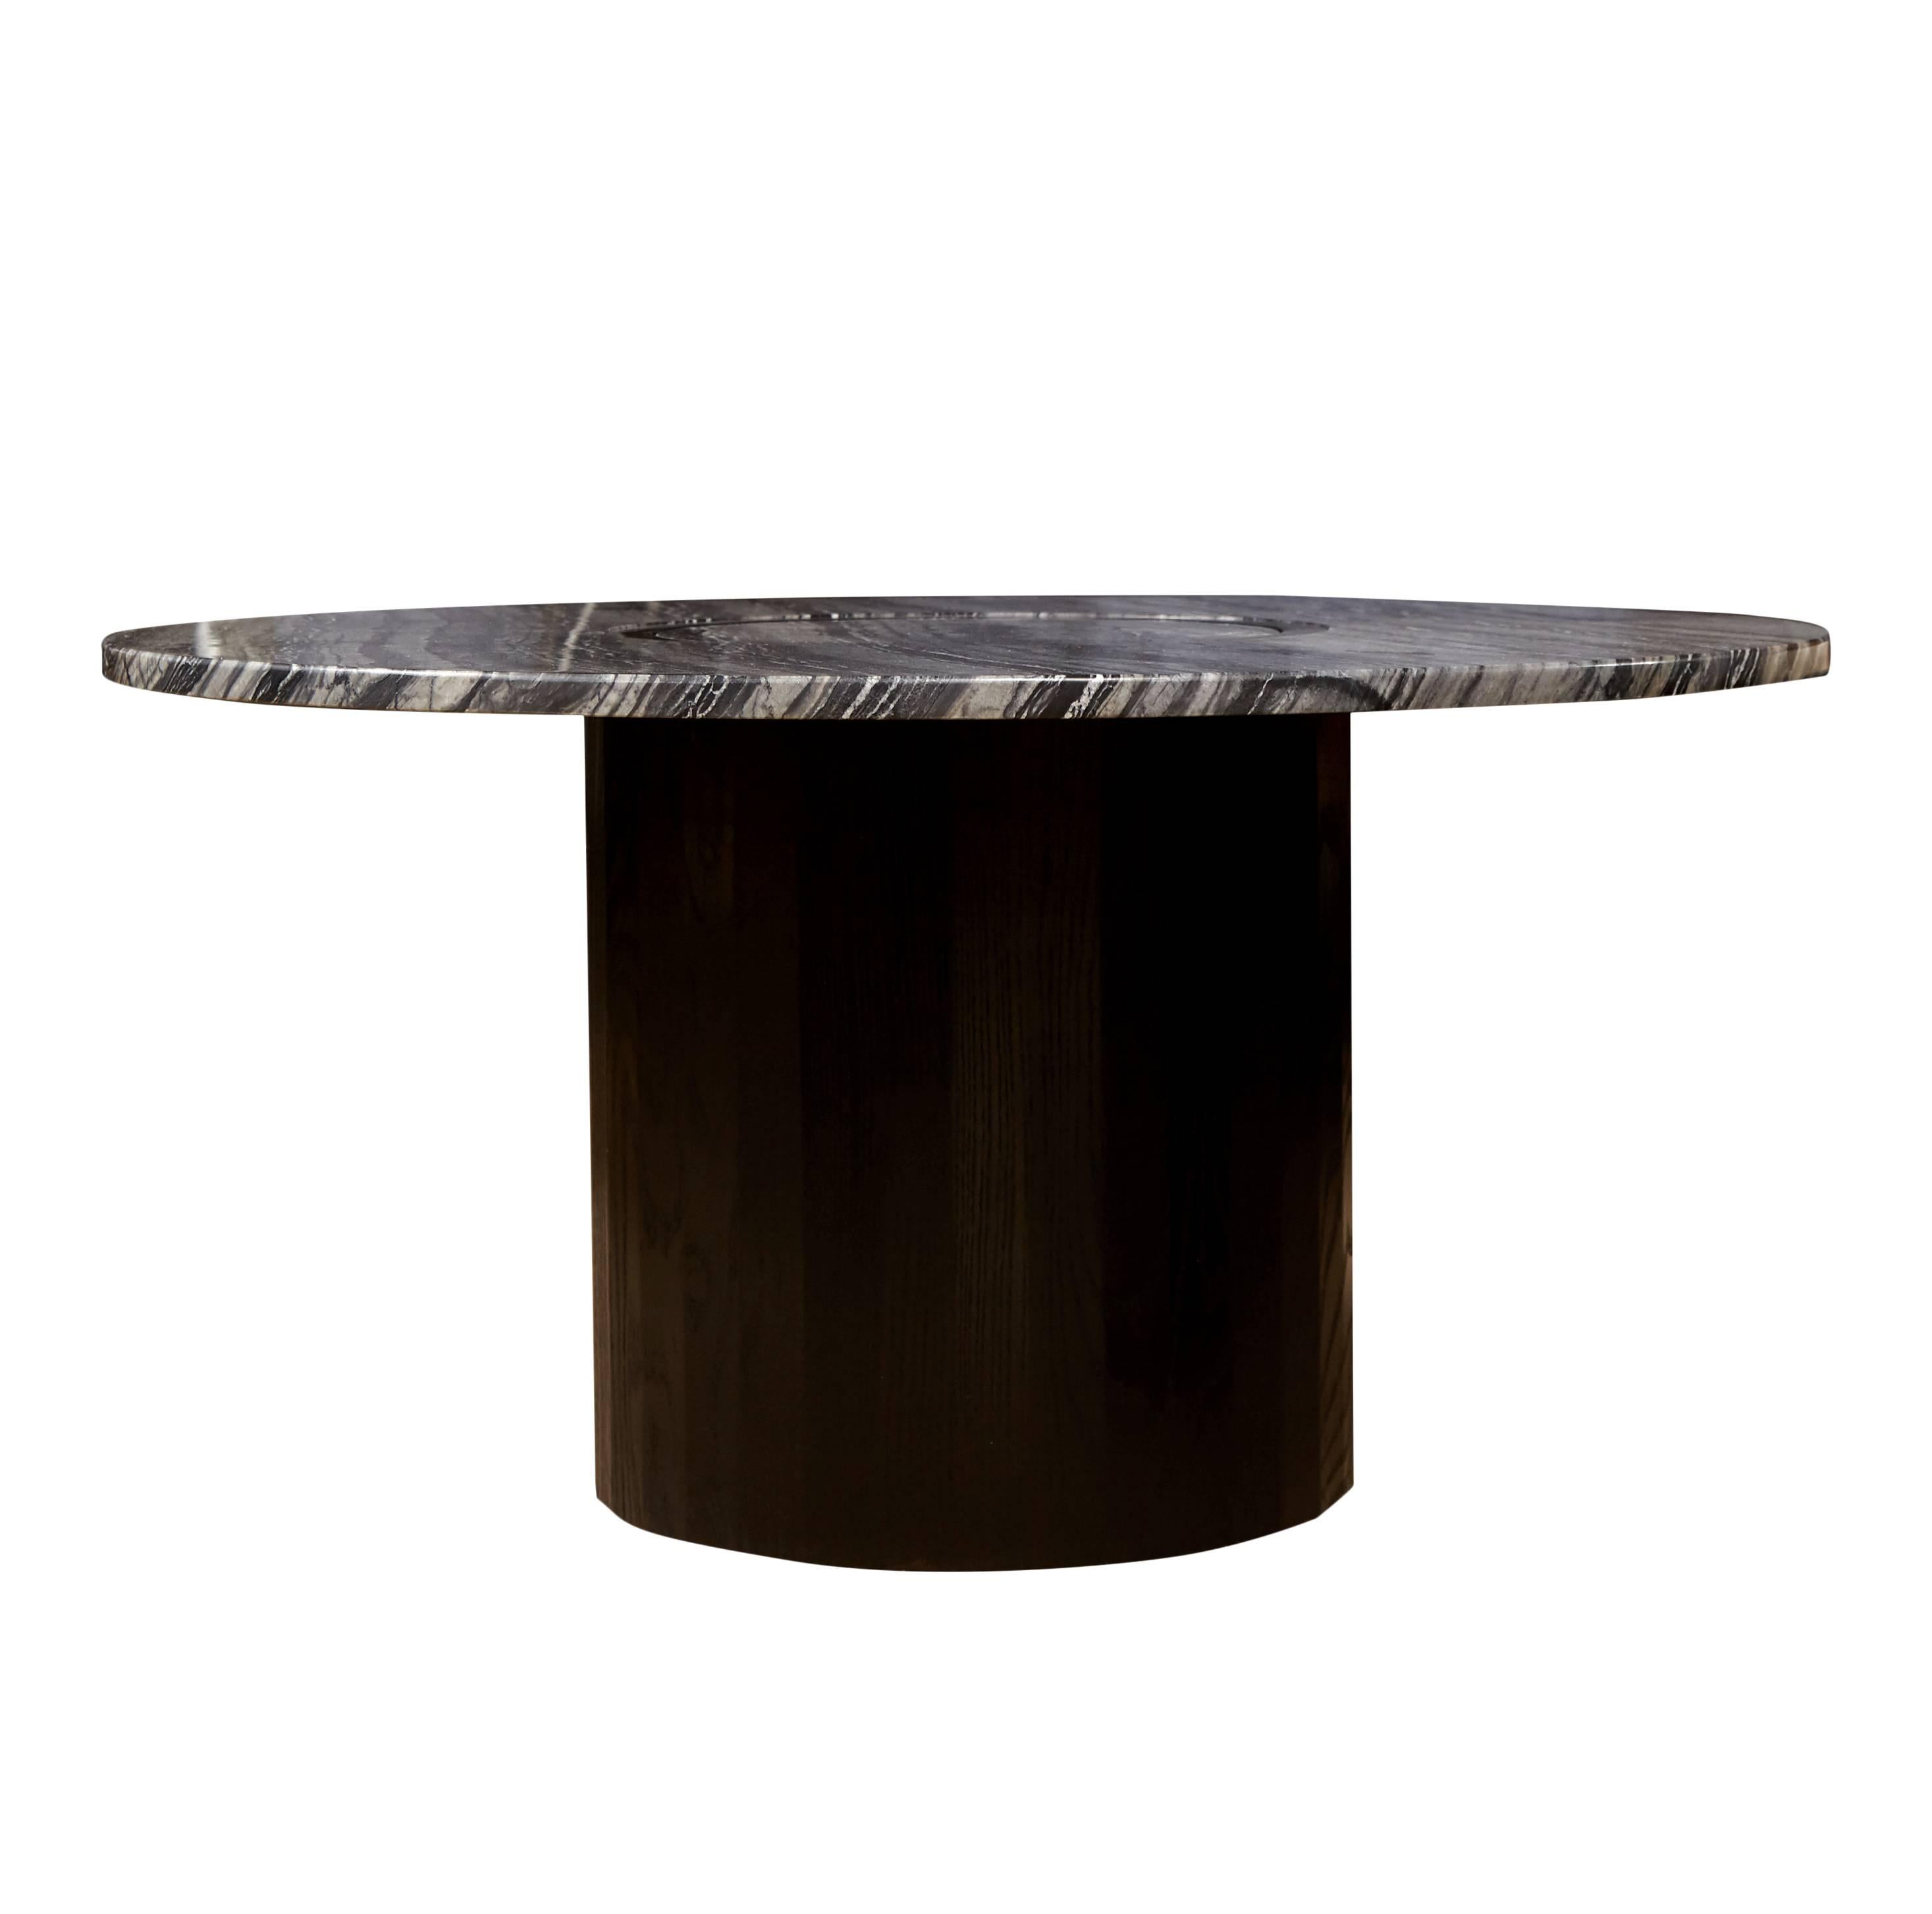 The Bastet coffee table is made from blackened ash coopered together with grain matched detailing. Marble sits flush on the faceted base as the stones layers wander across the surface. Dimensions, finish and stone are customizable to